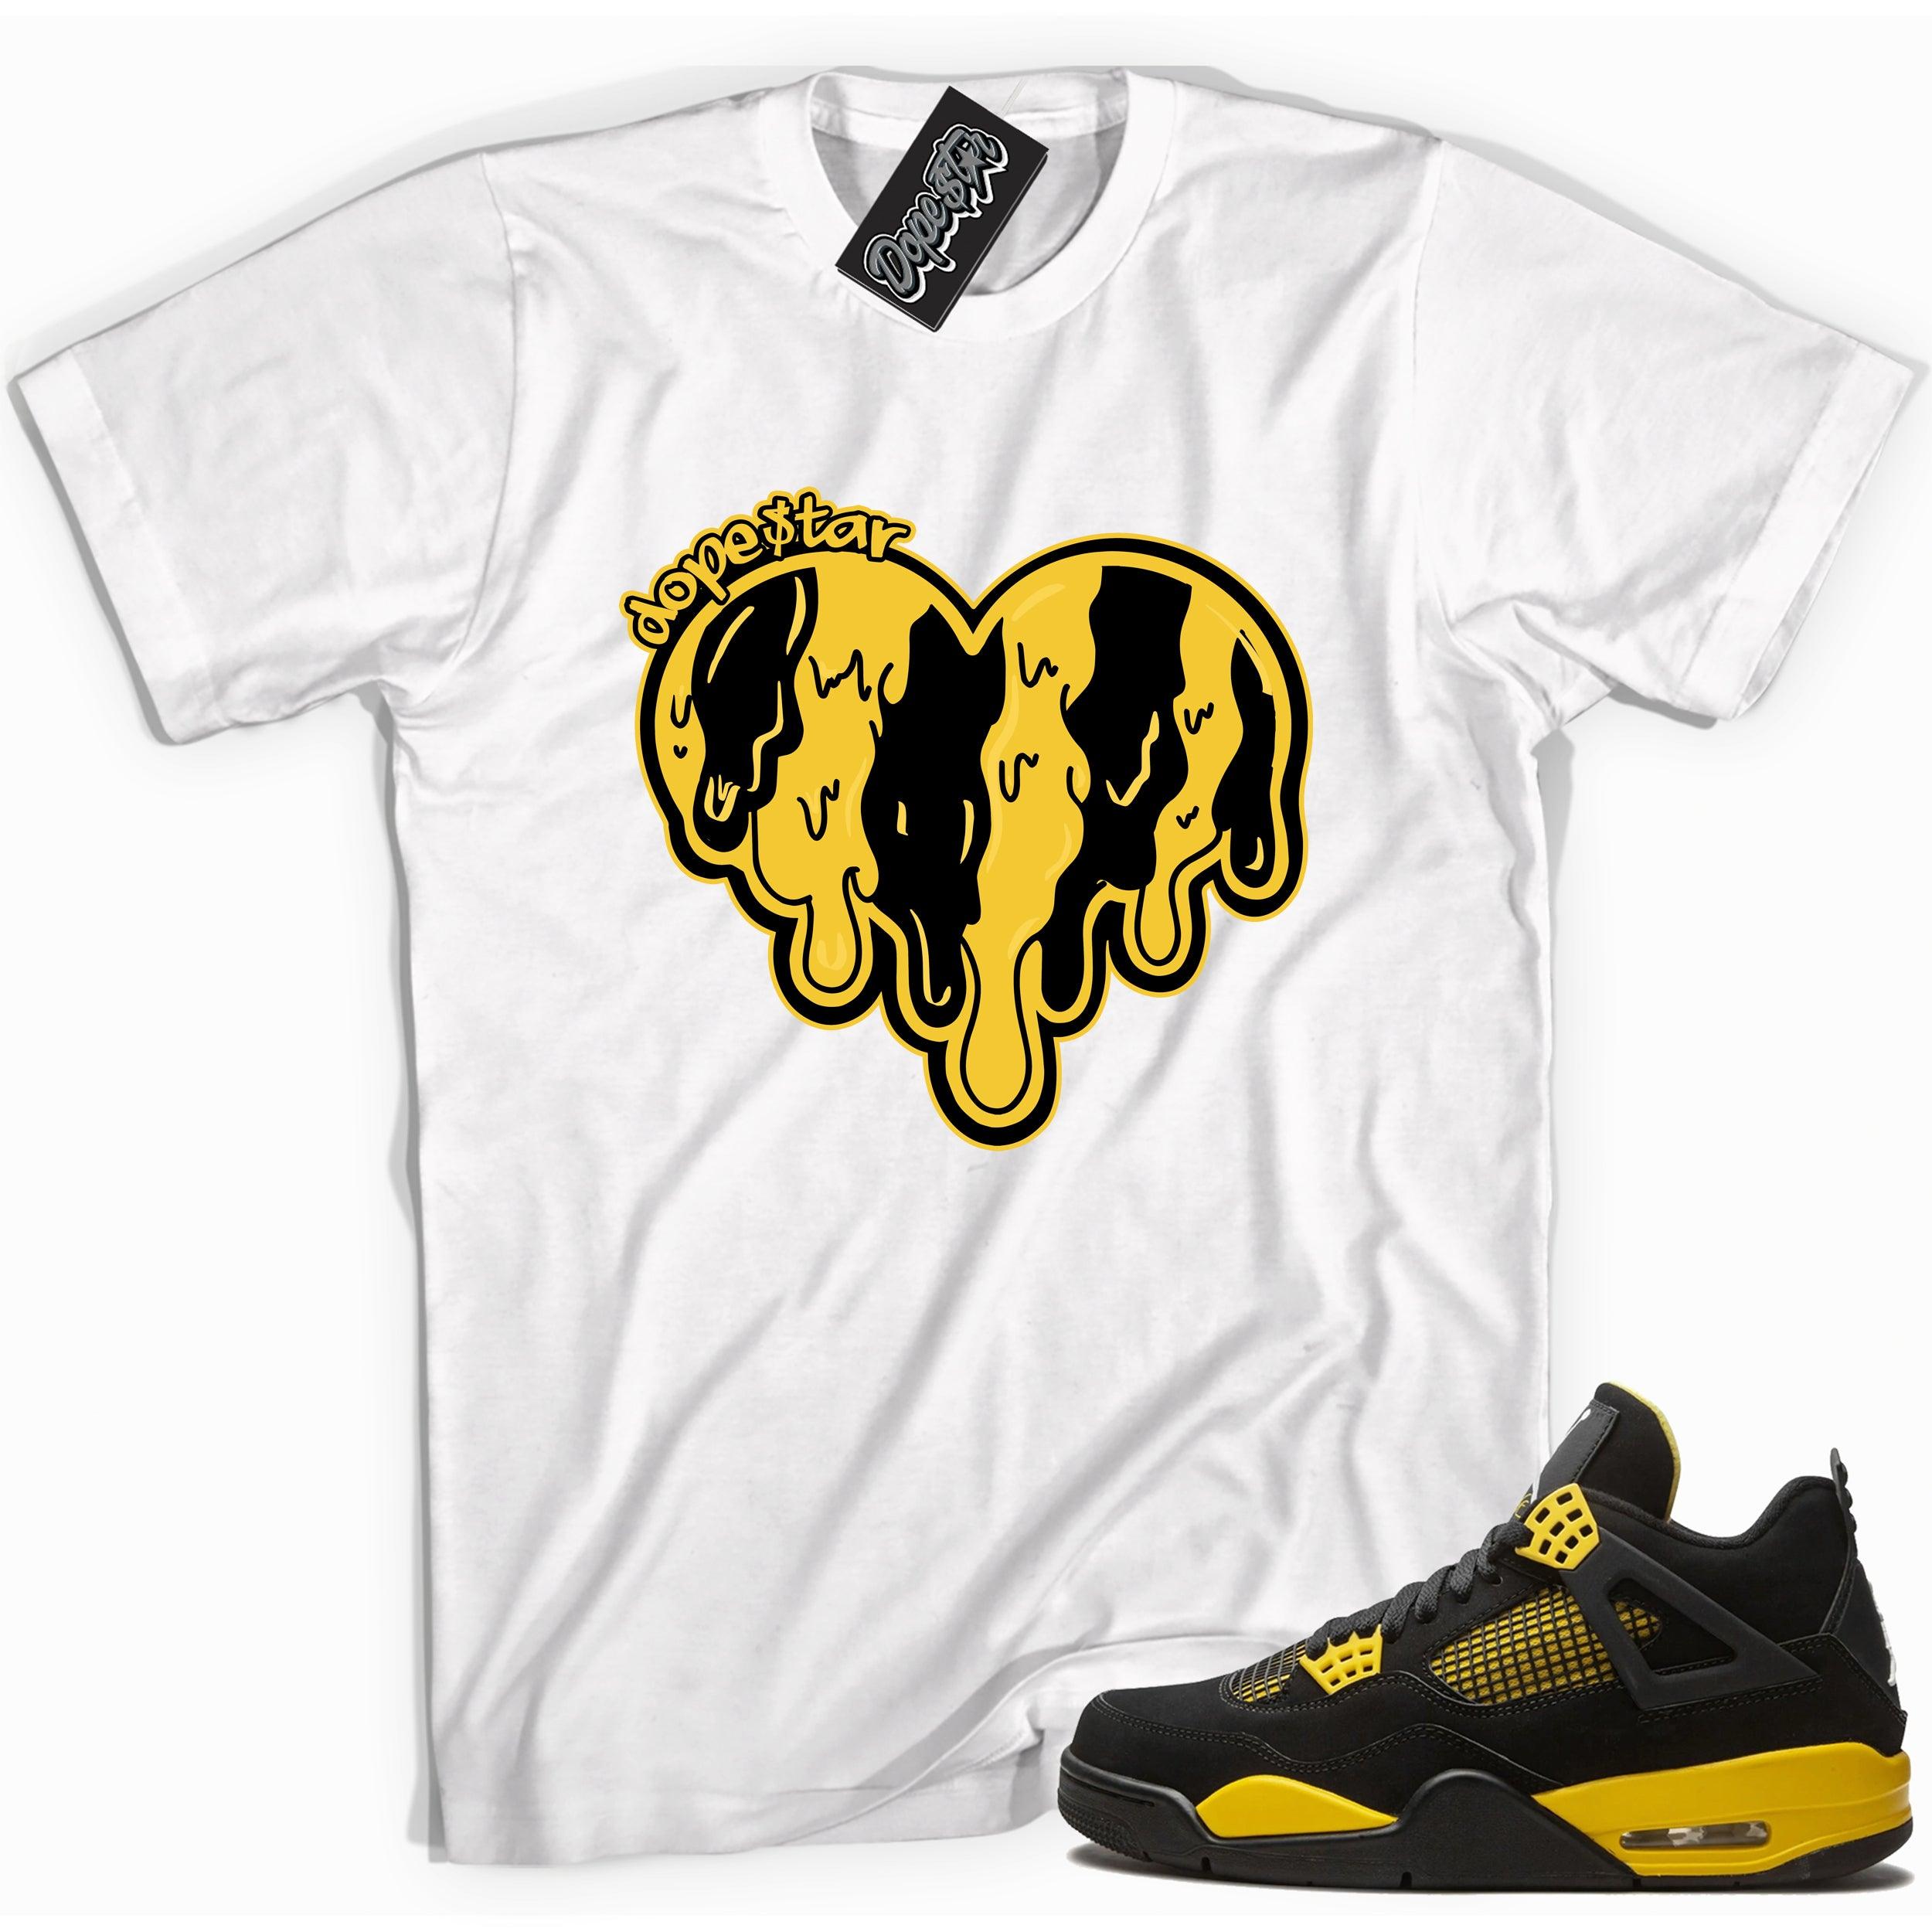 Cool white graphic tee with 'melting heart' print, that perfectly matches Air Jordan 4 Thunder sneakers